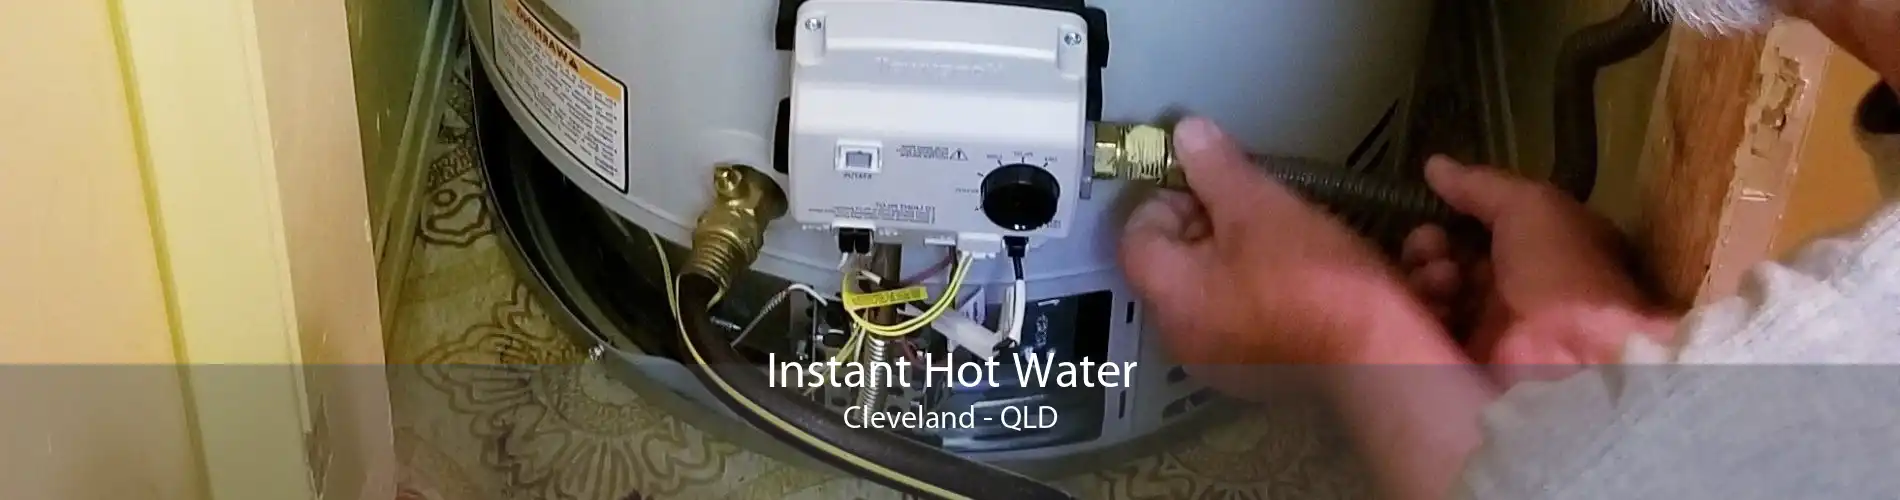 Instant Hot Water Cleveland - QLD